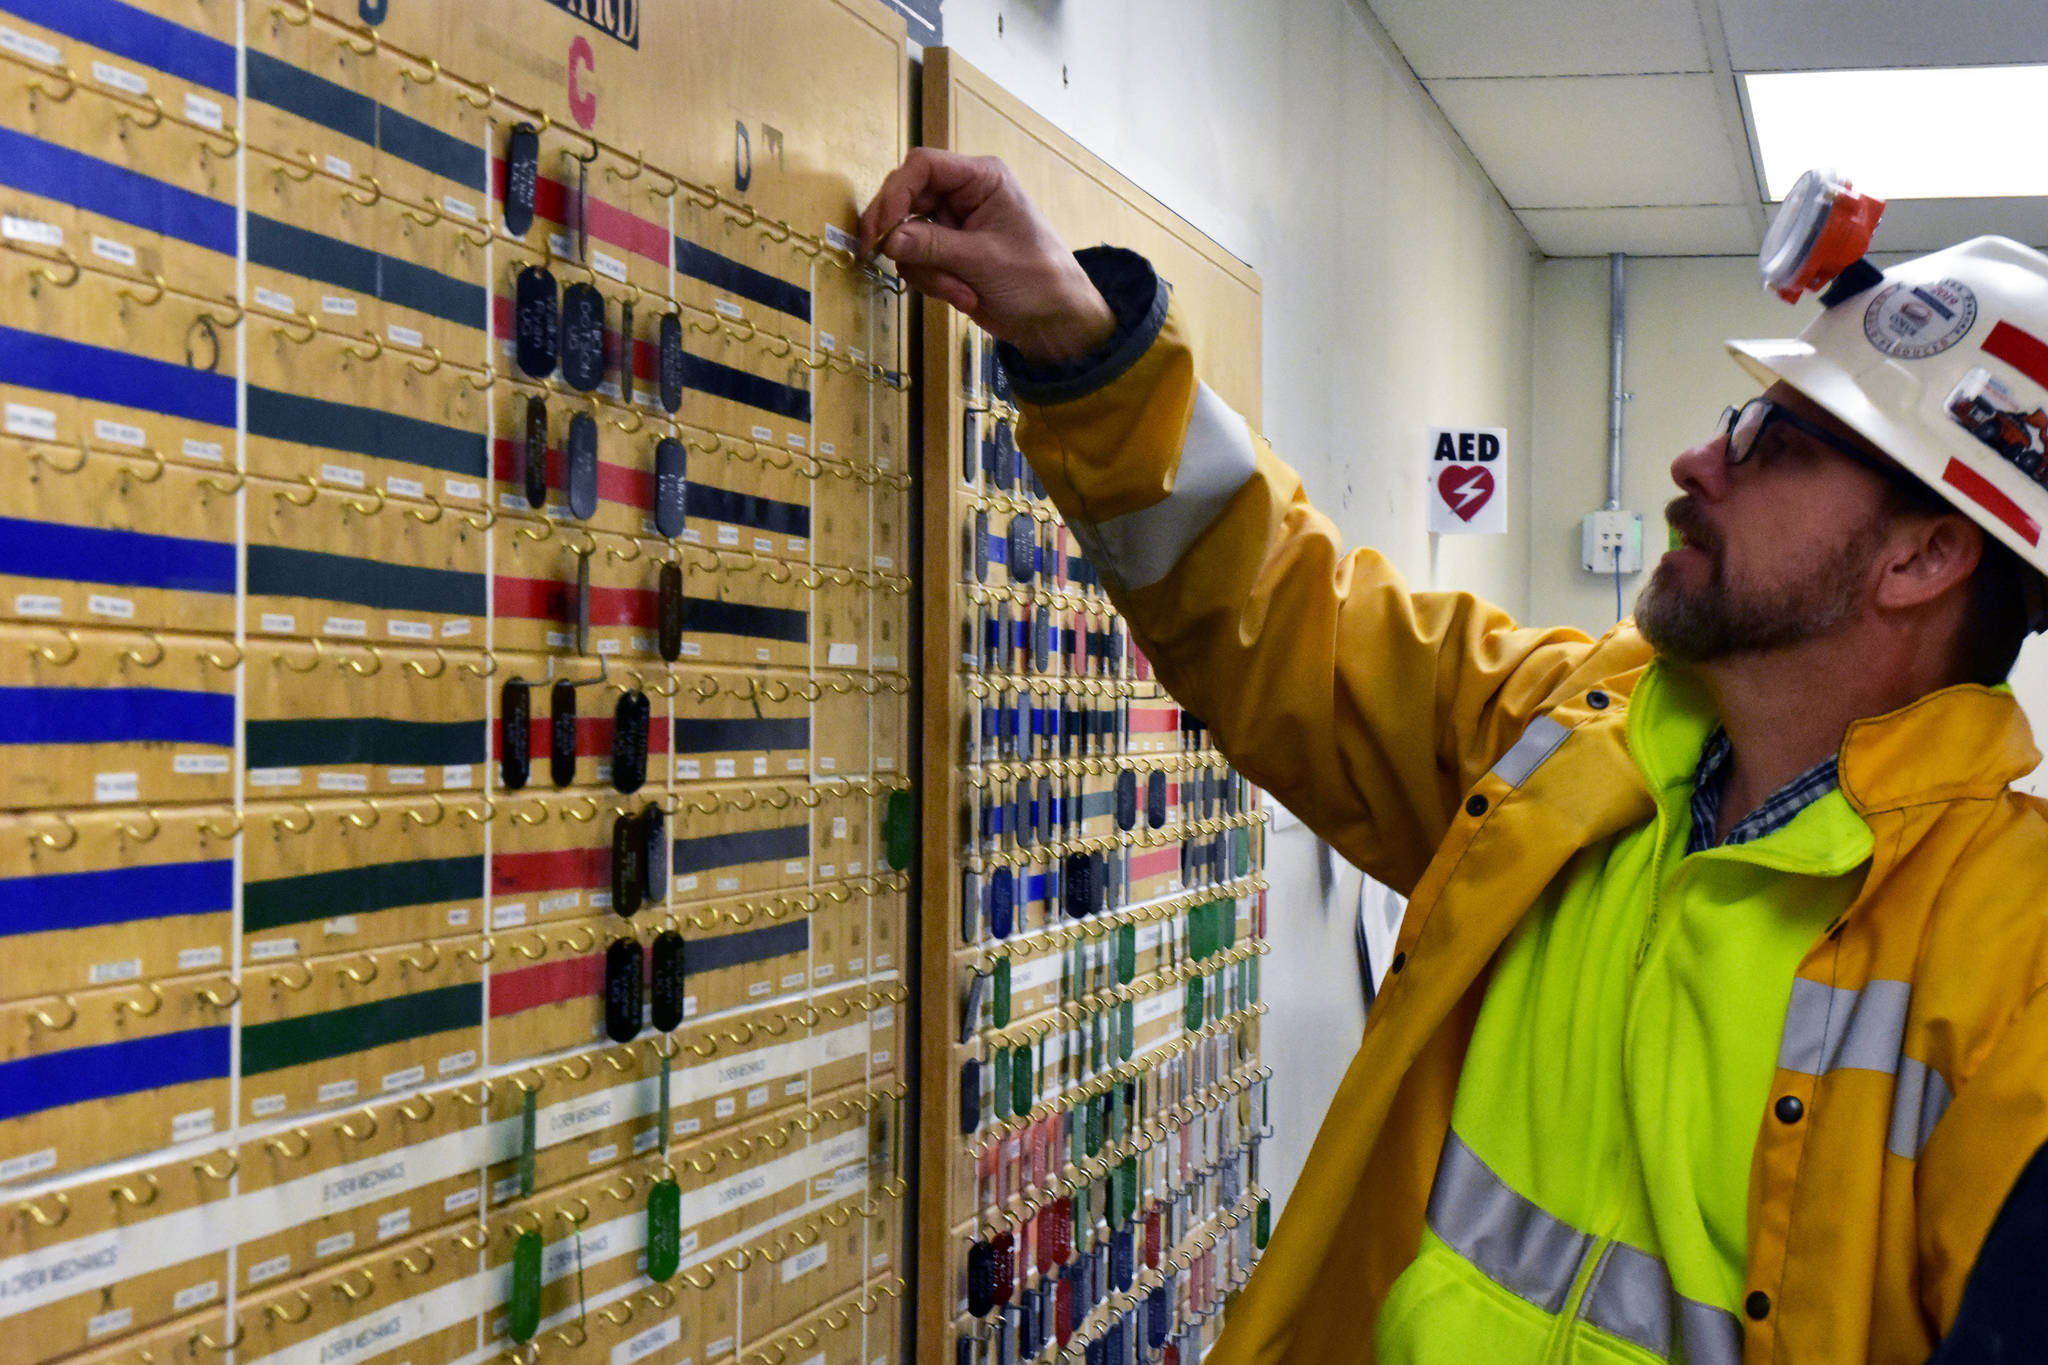 Mark Kiessling, general manger at the Kensington Mine moves a brass tag used to track how many people are currently in the mine on Monday, Oct. 14, 2019. (Peter Segall | Juneau Empire)